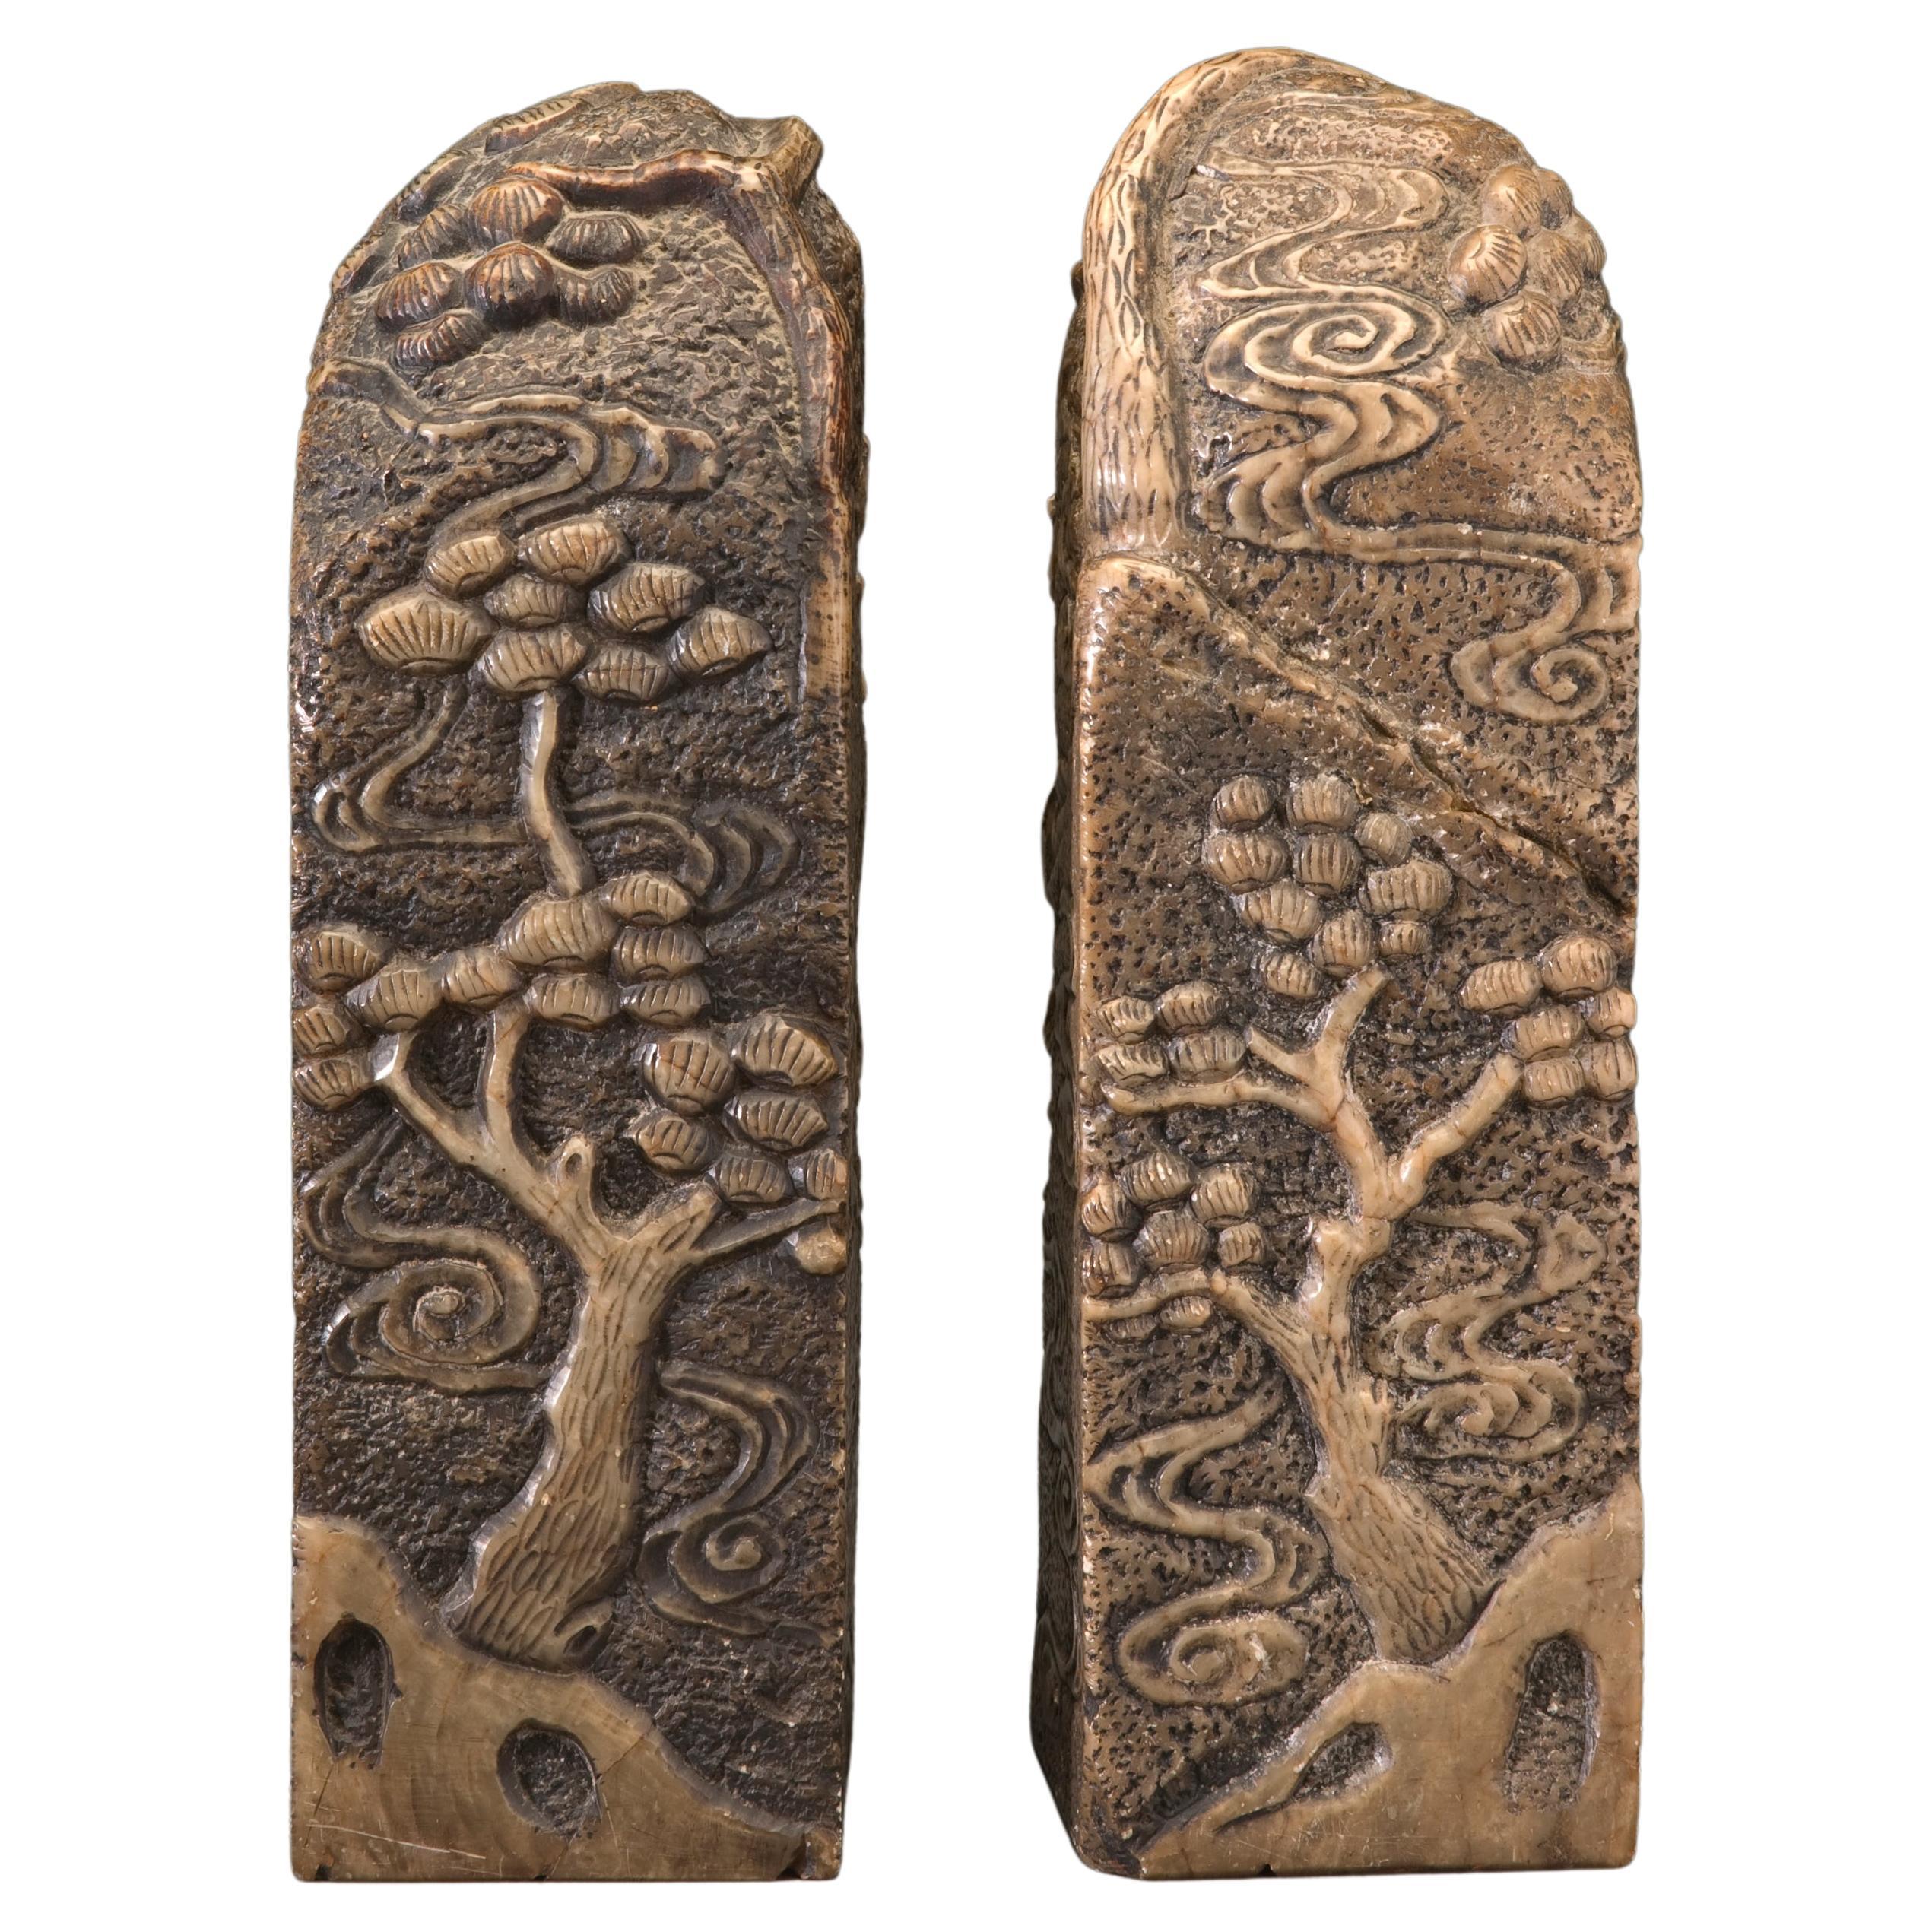 Soapstone Pair of Chinese Soap Stone Chops with Stamp Carving